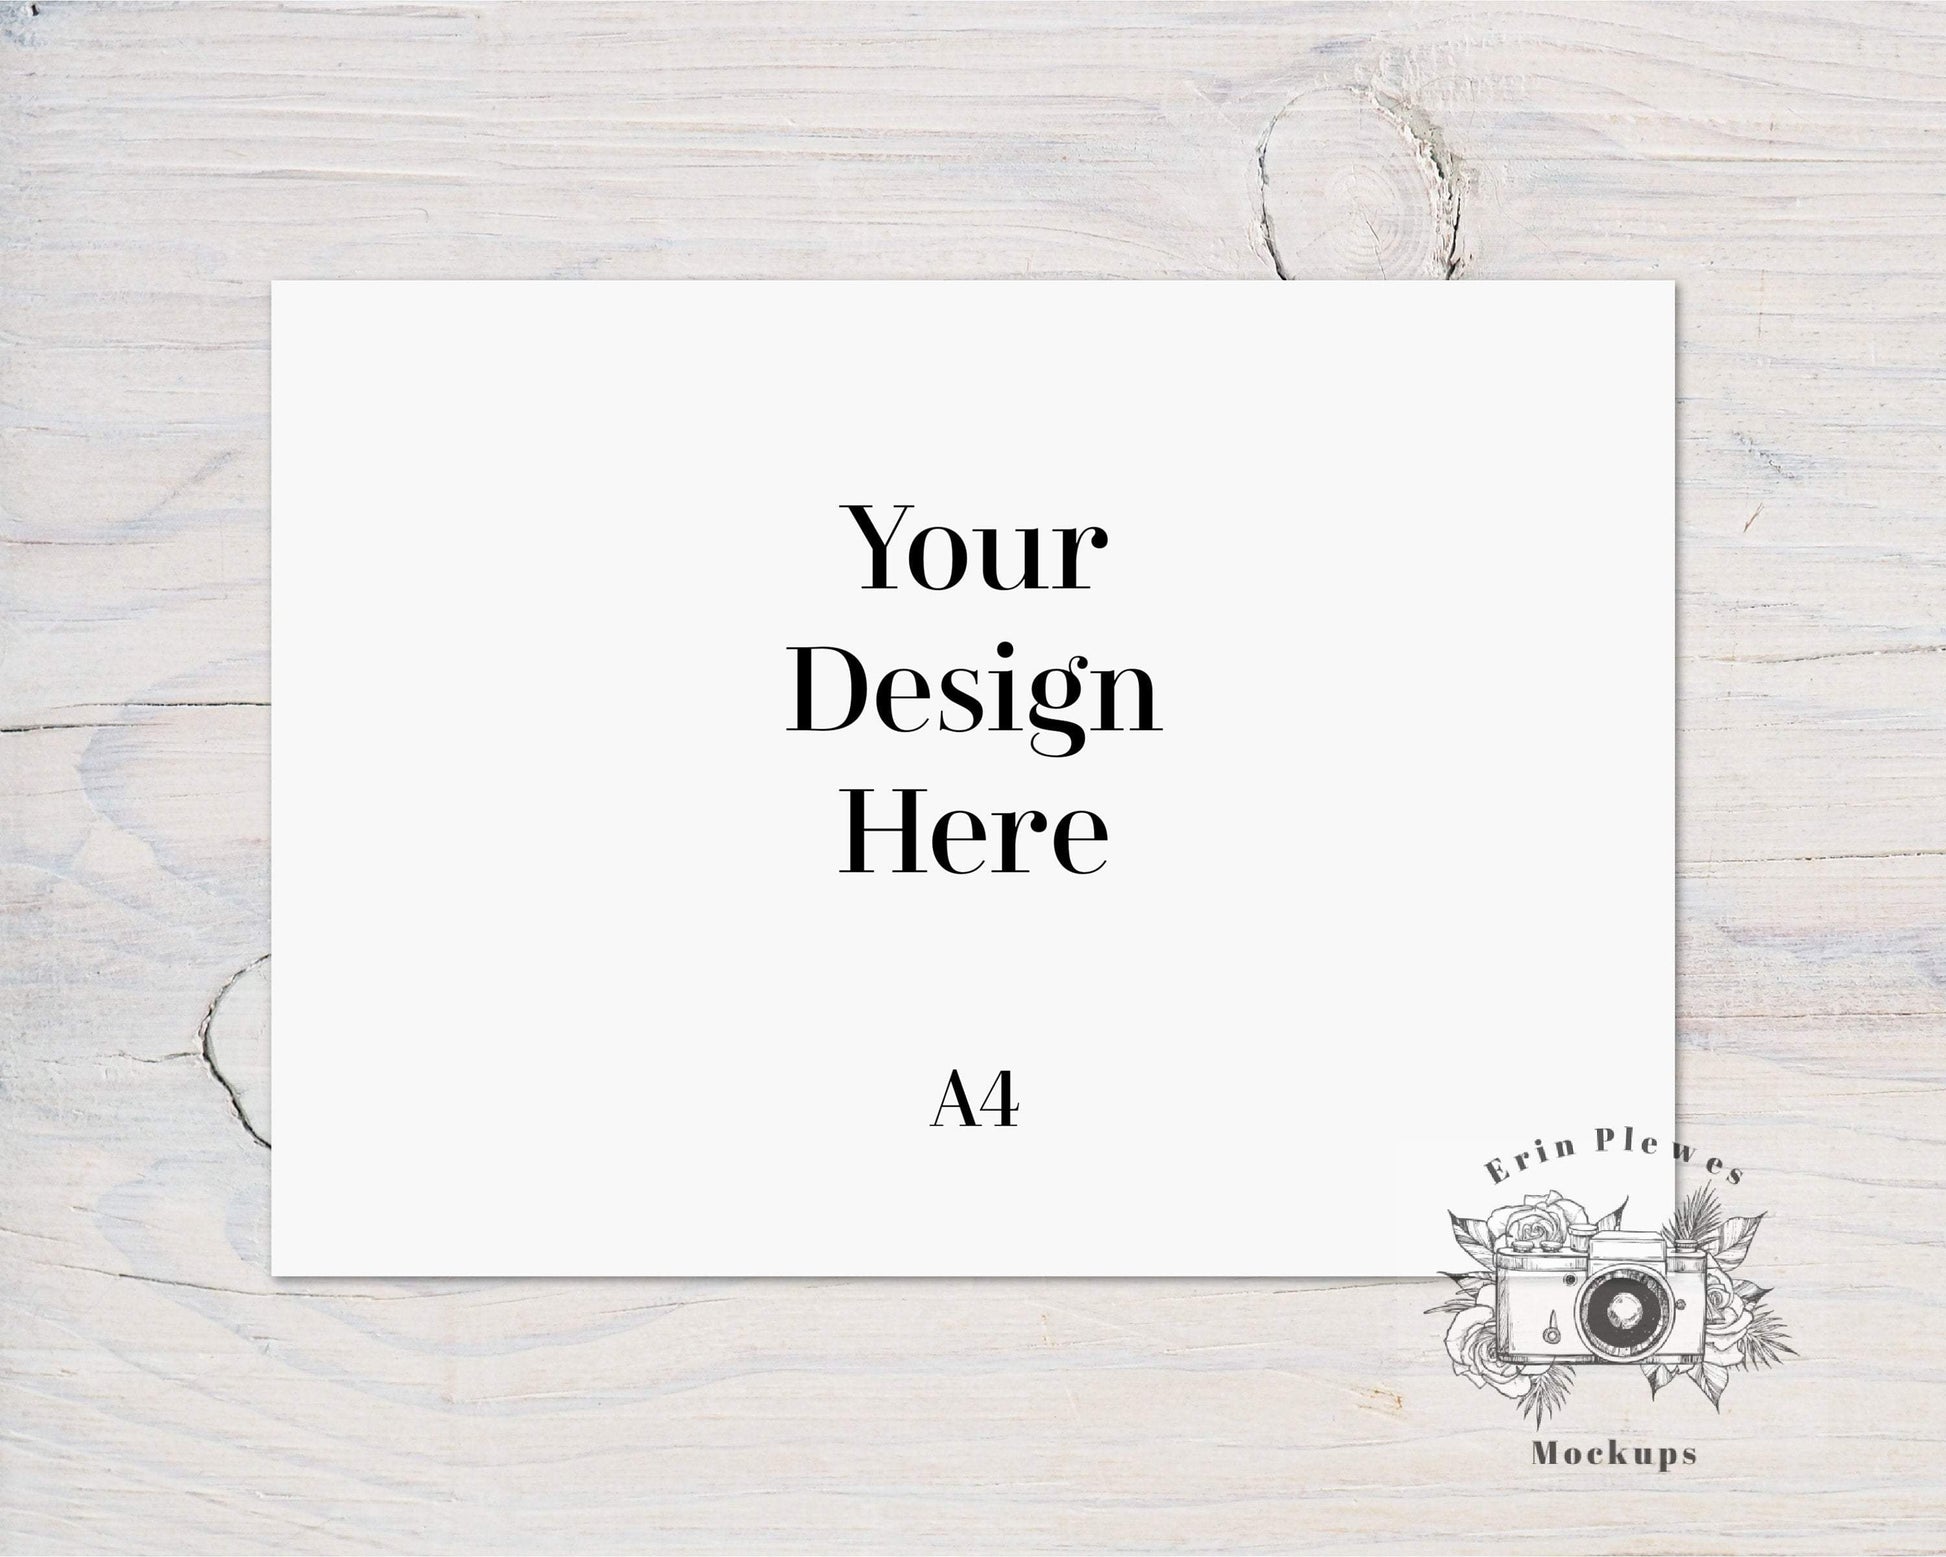 Erin Plewes Mockups Poster Mockup, A4 Stationery mockup on white washed rustic wood with knots, Paper mock-up, Jpeg Instant Digital Download Template